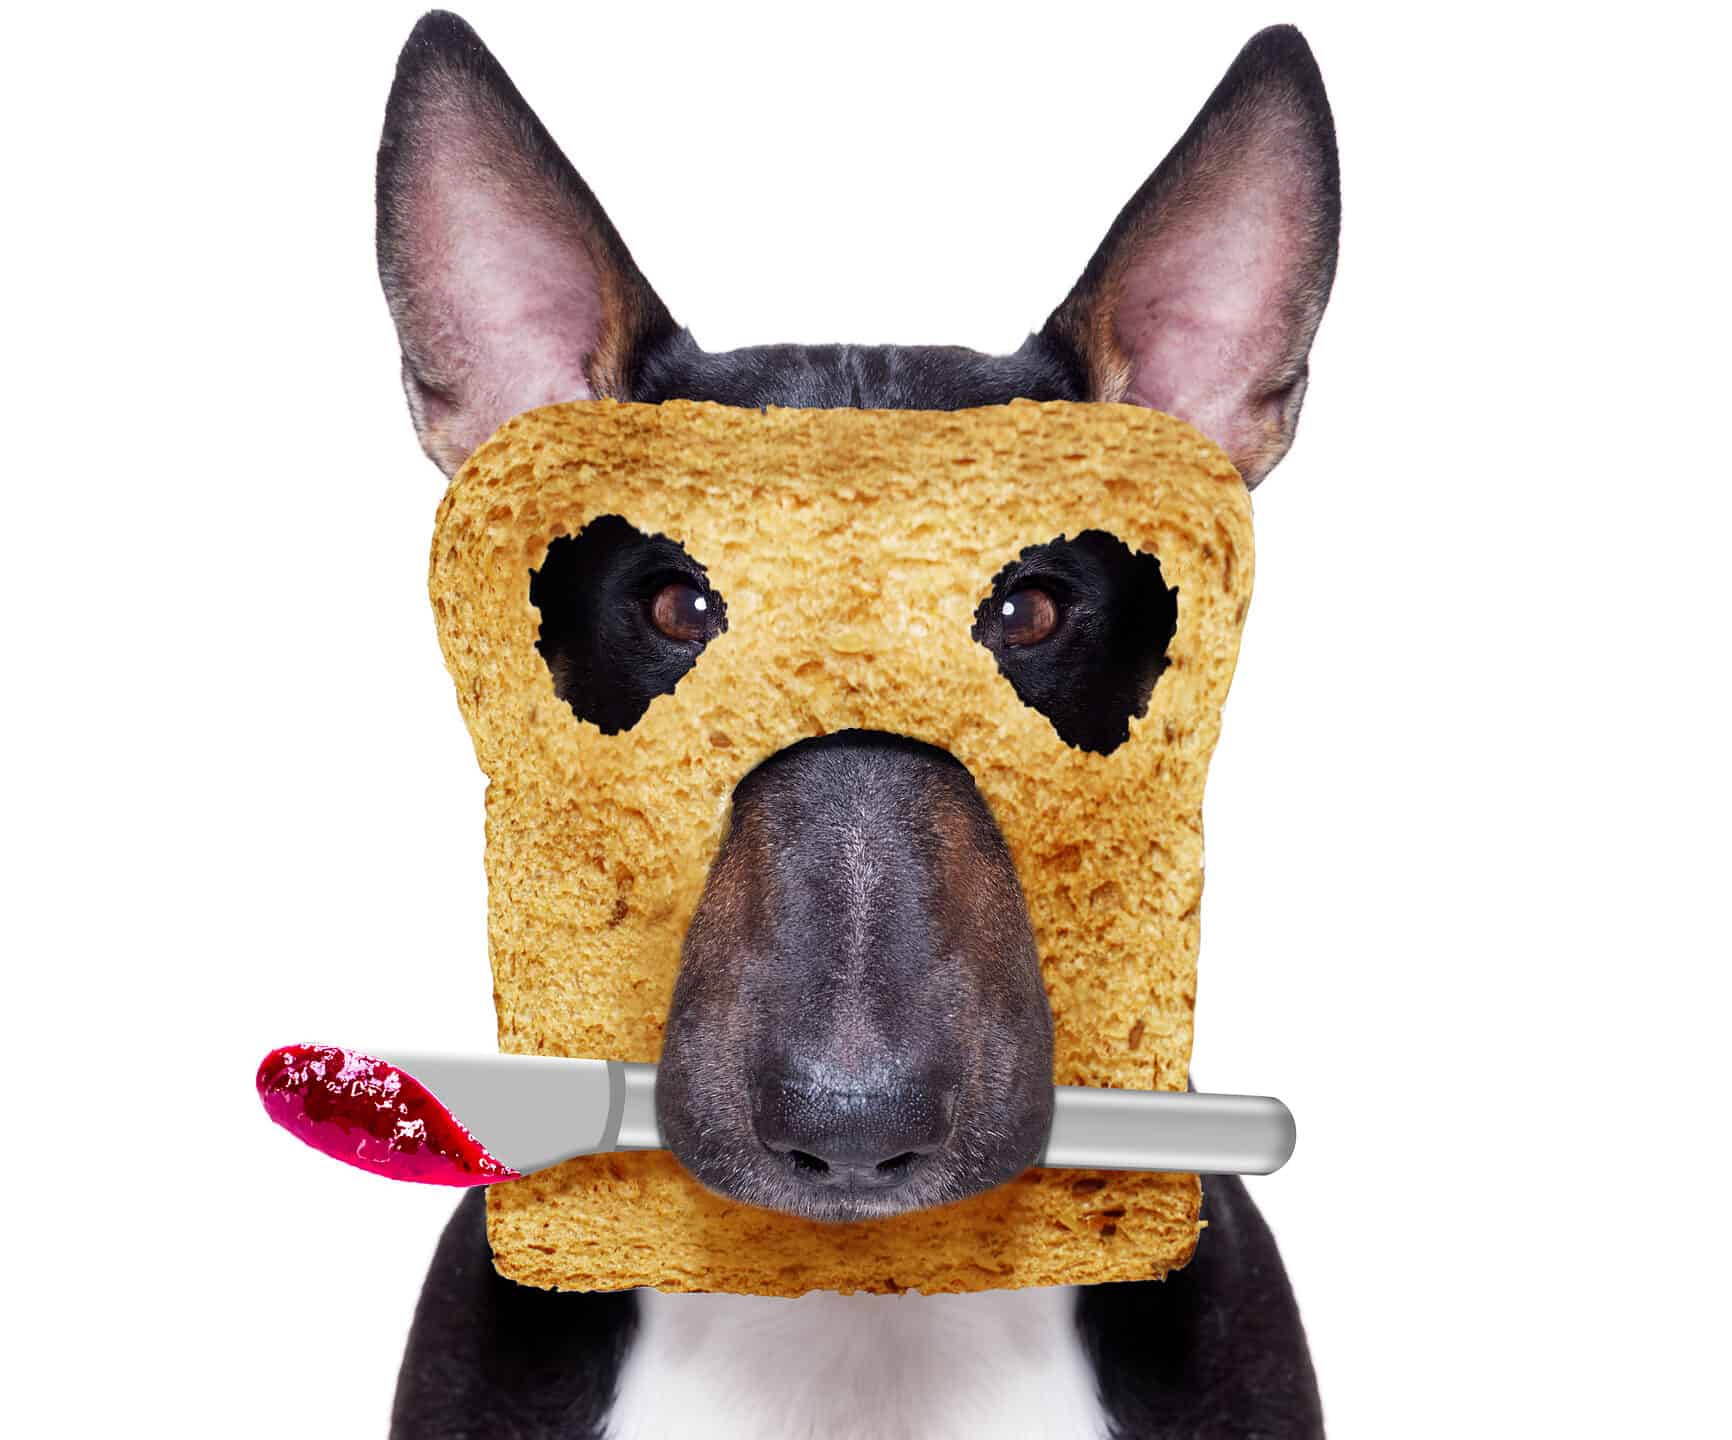 Dog with toast and jam/jelly